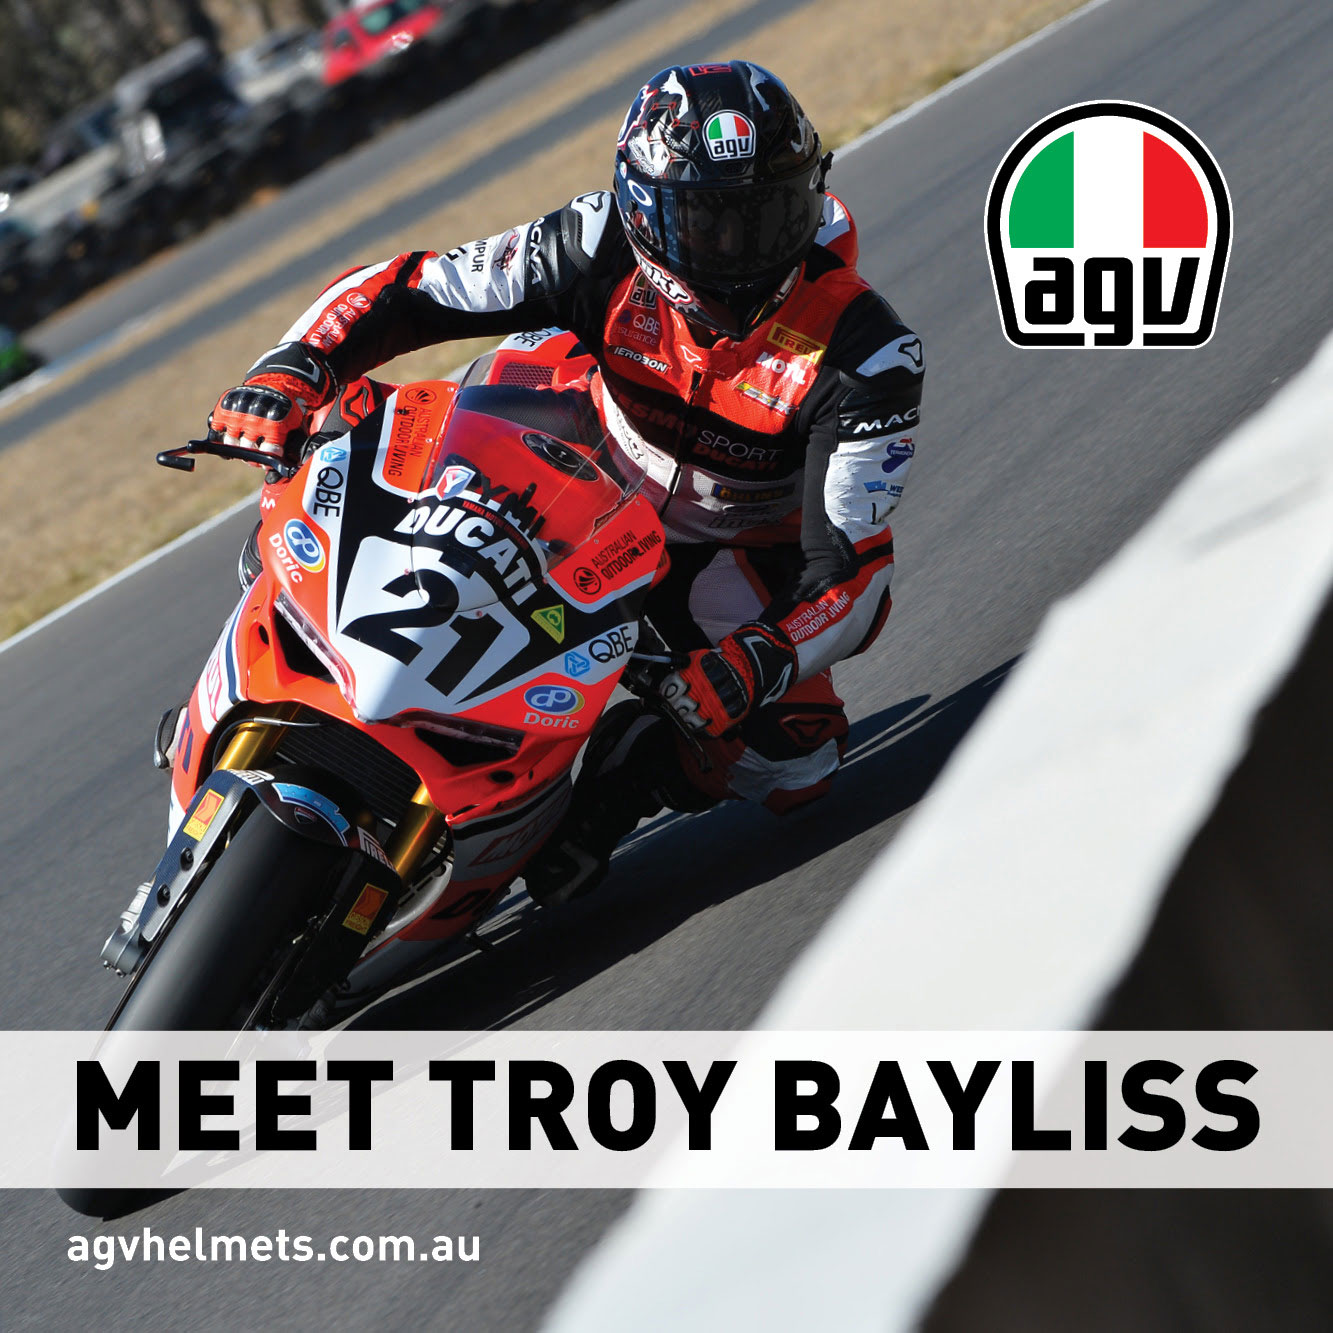 Troy Bayliss to join the AGV Helmets Australia stand for signings on Sunday